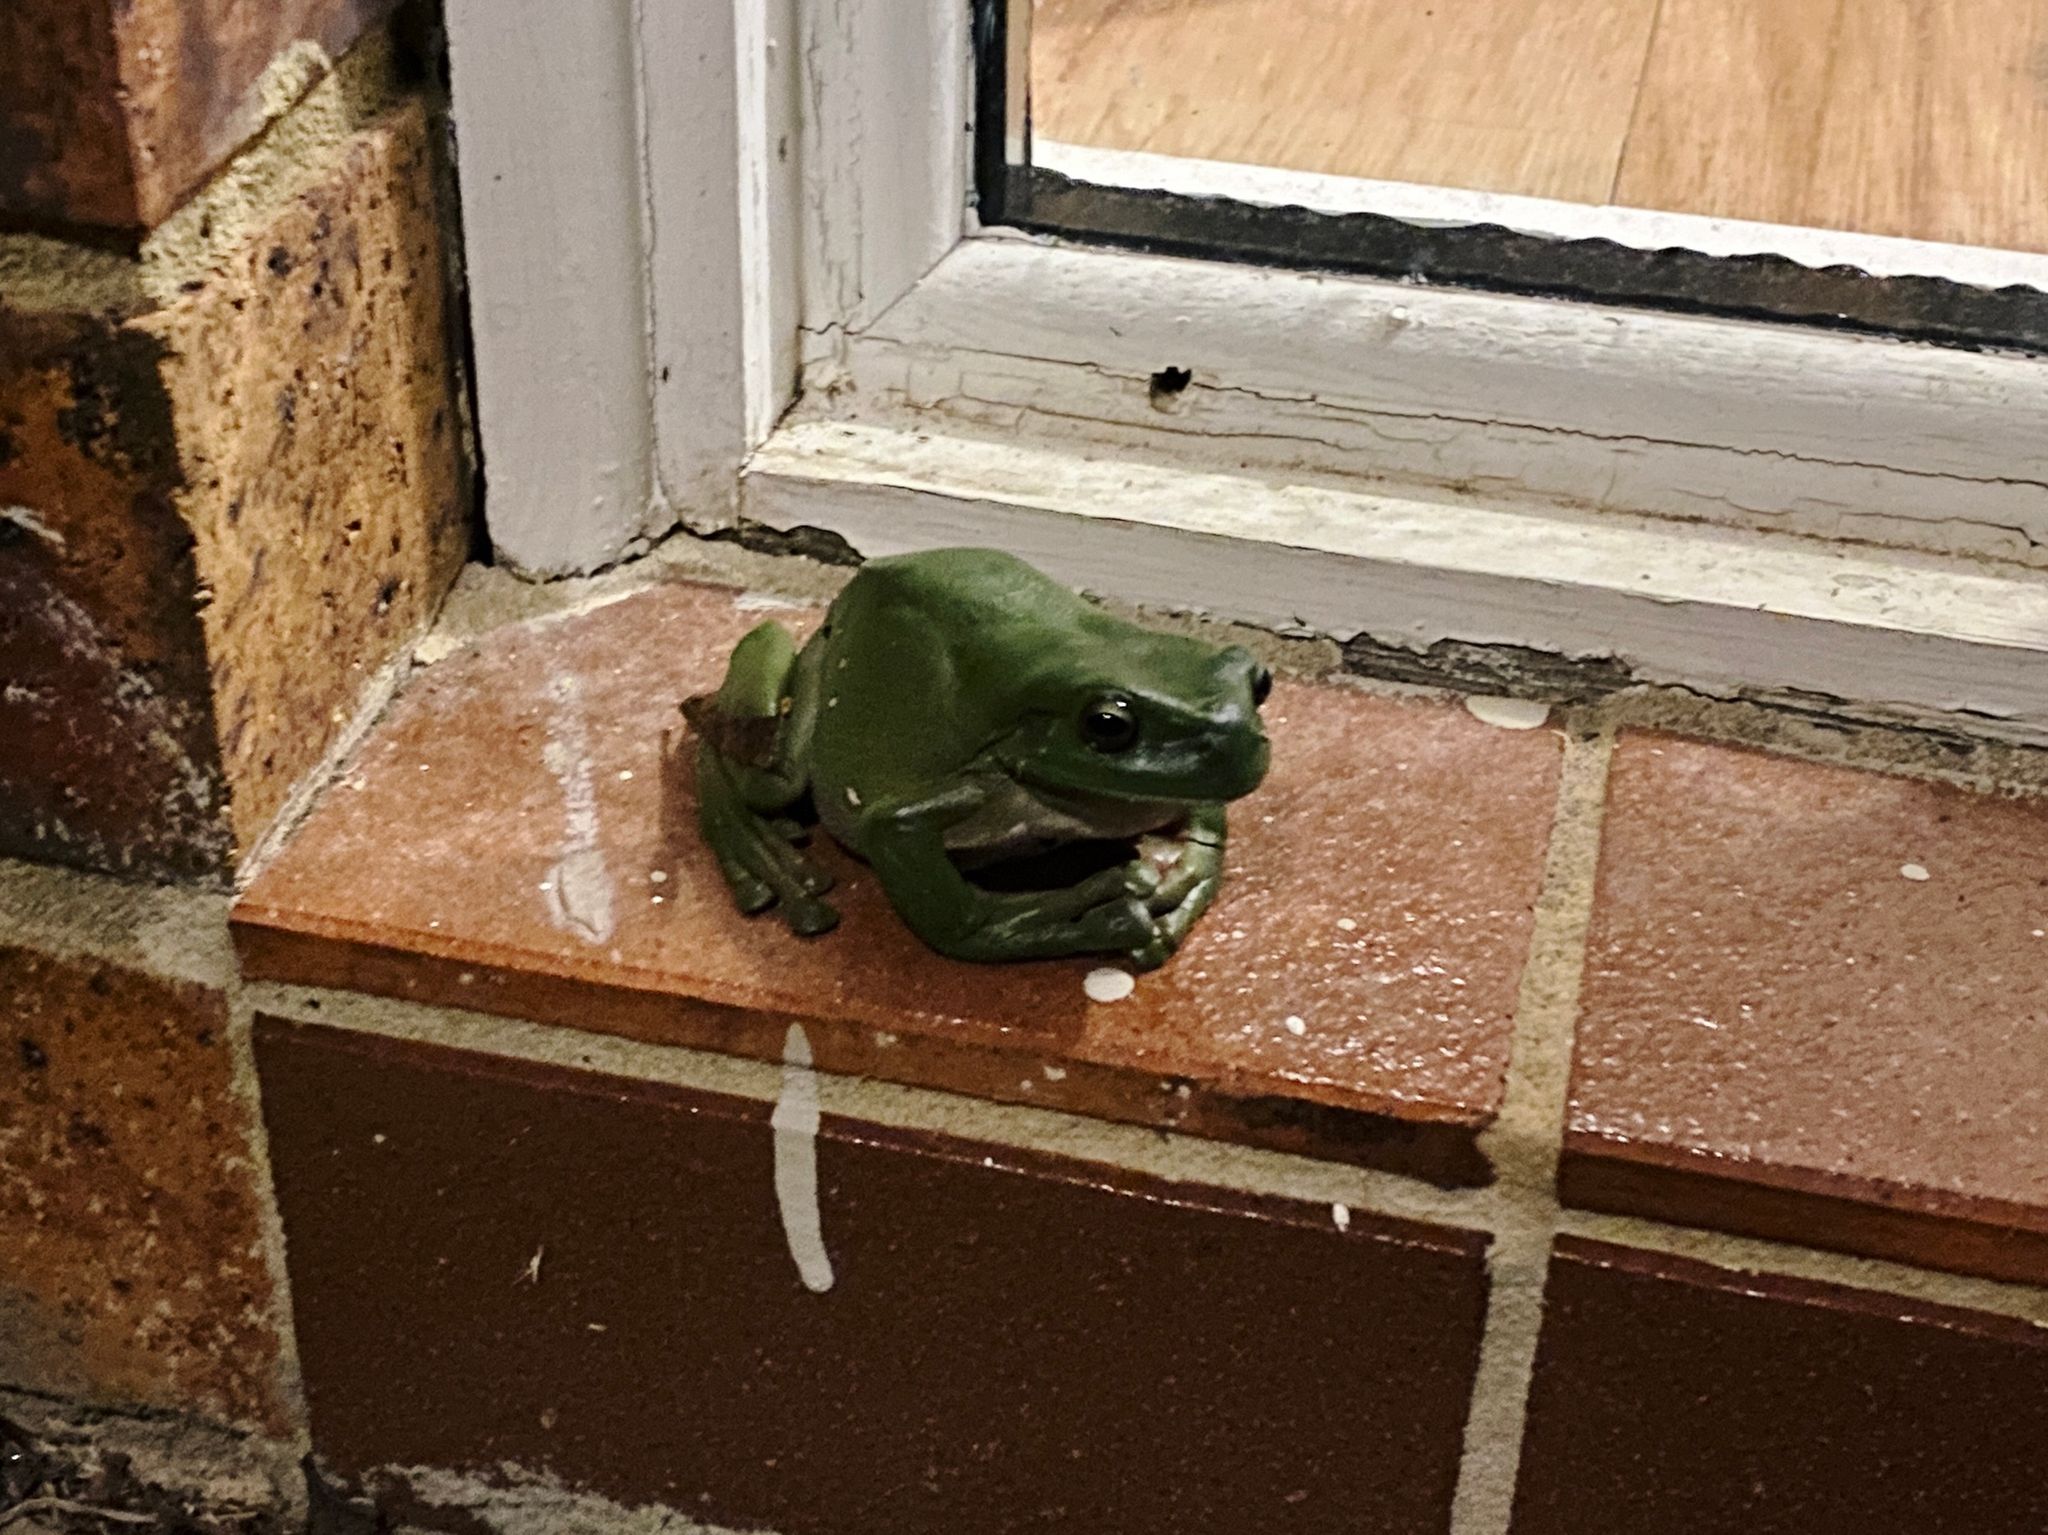 A photo of a green frog sitting on the ledge in front of the narrow window that's next to our front door.